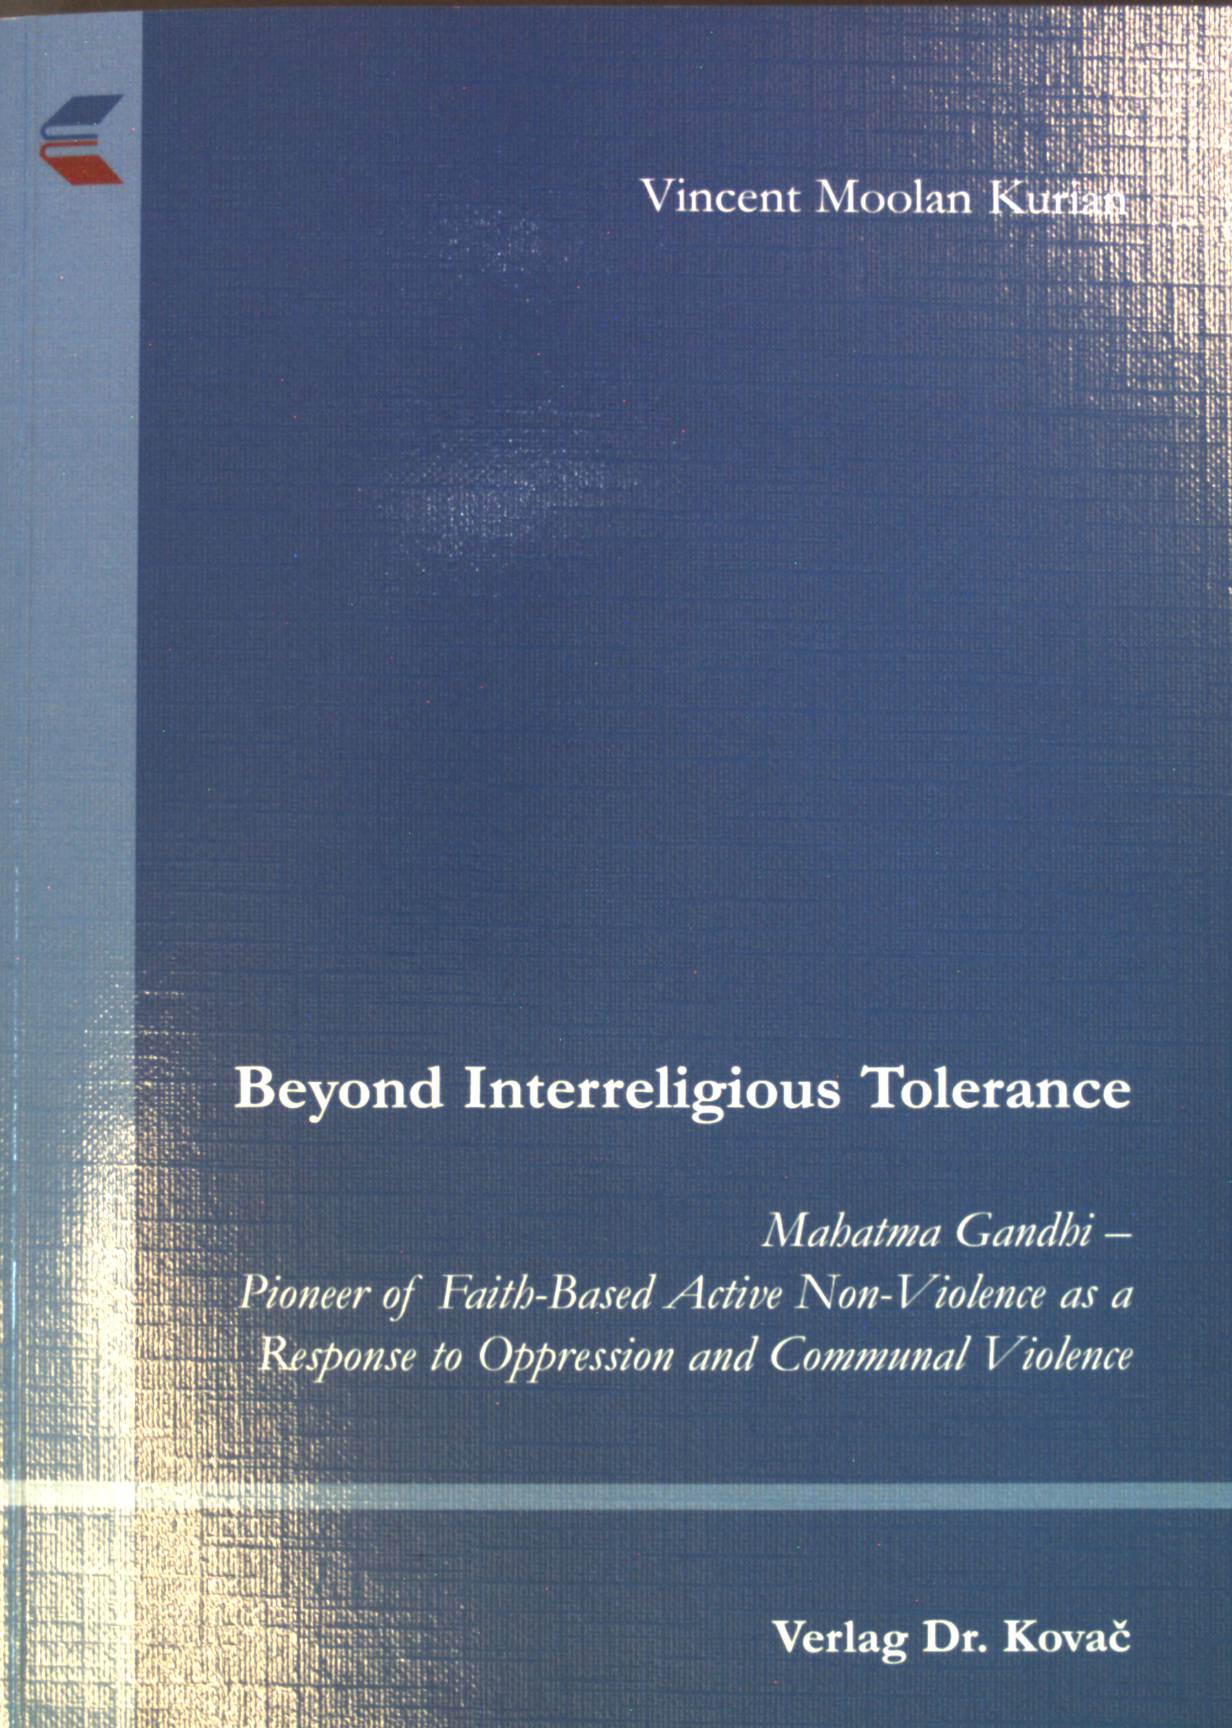 Beyond interreligious tolerance : Mahatma Gandhi - pioneer of faith-based active non-violence as a response to oppression and communal violence. Schriftenreihe Ethik in Forschung und Praxis ; Bd. 15 - Moolan Kurian, Vincent